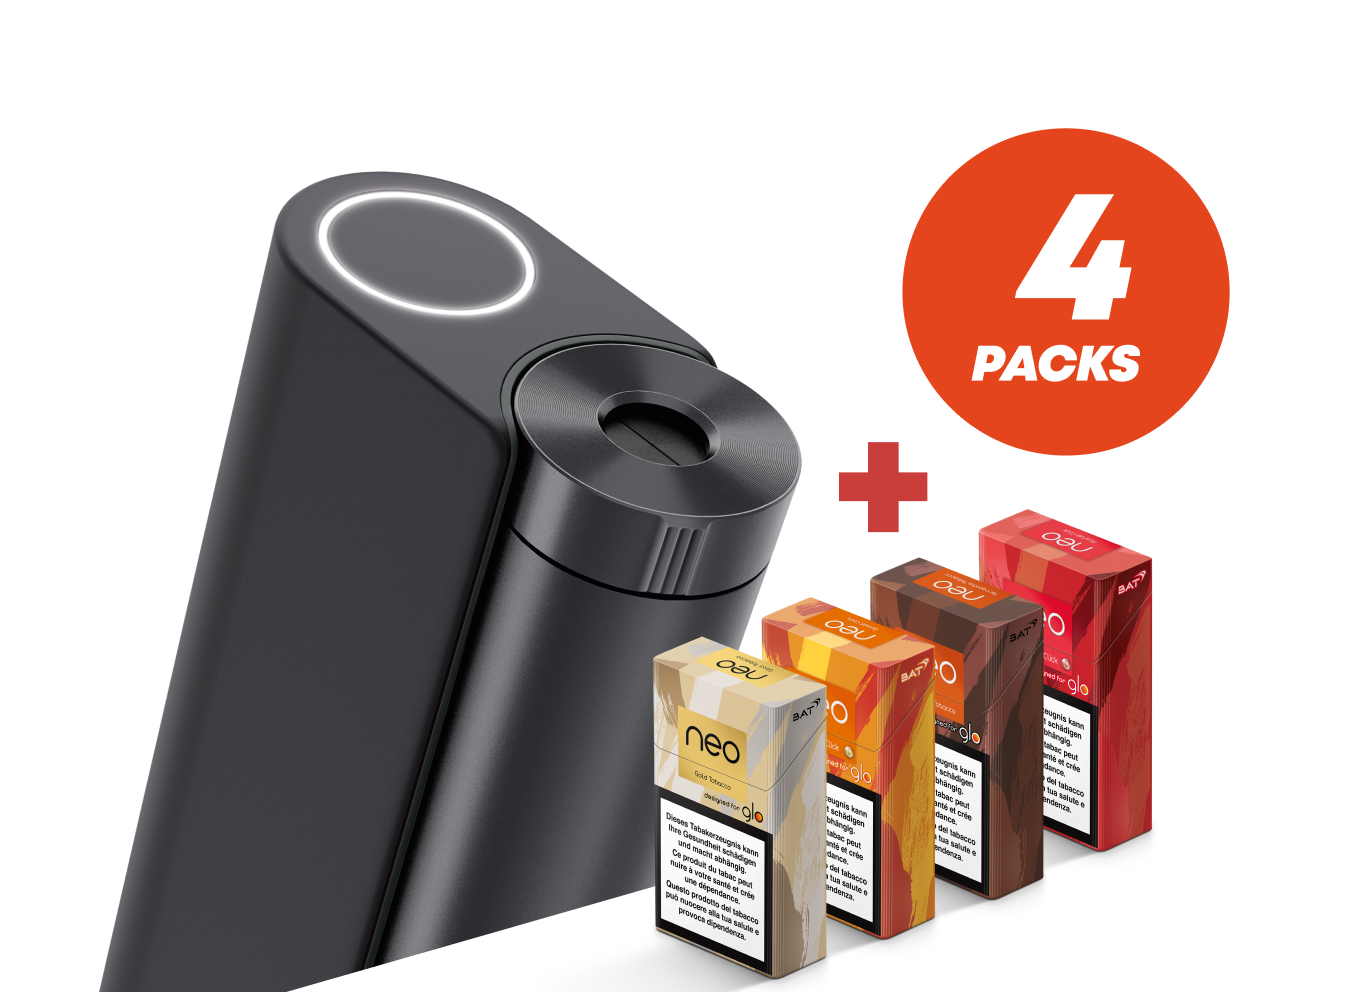 Our welcome offer: a glo™ HYPER X2 tobacco heater and 4 packs of neo™ Tobacco stick for 39CHF